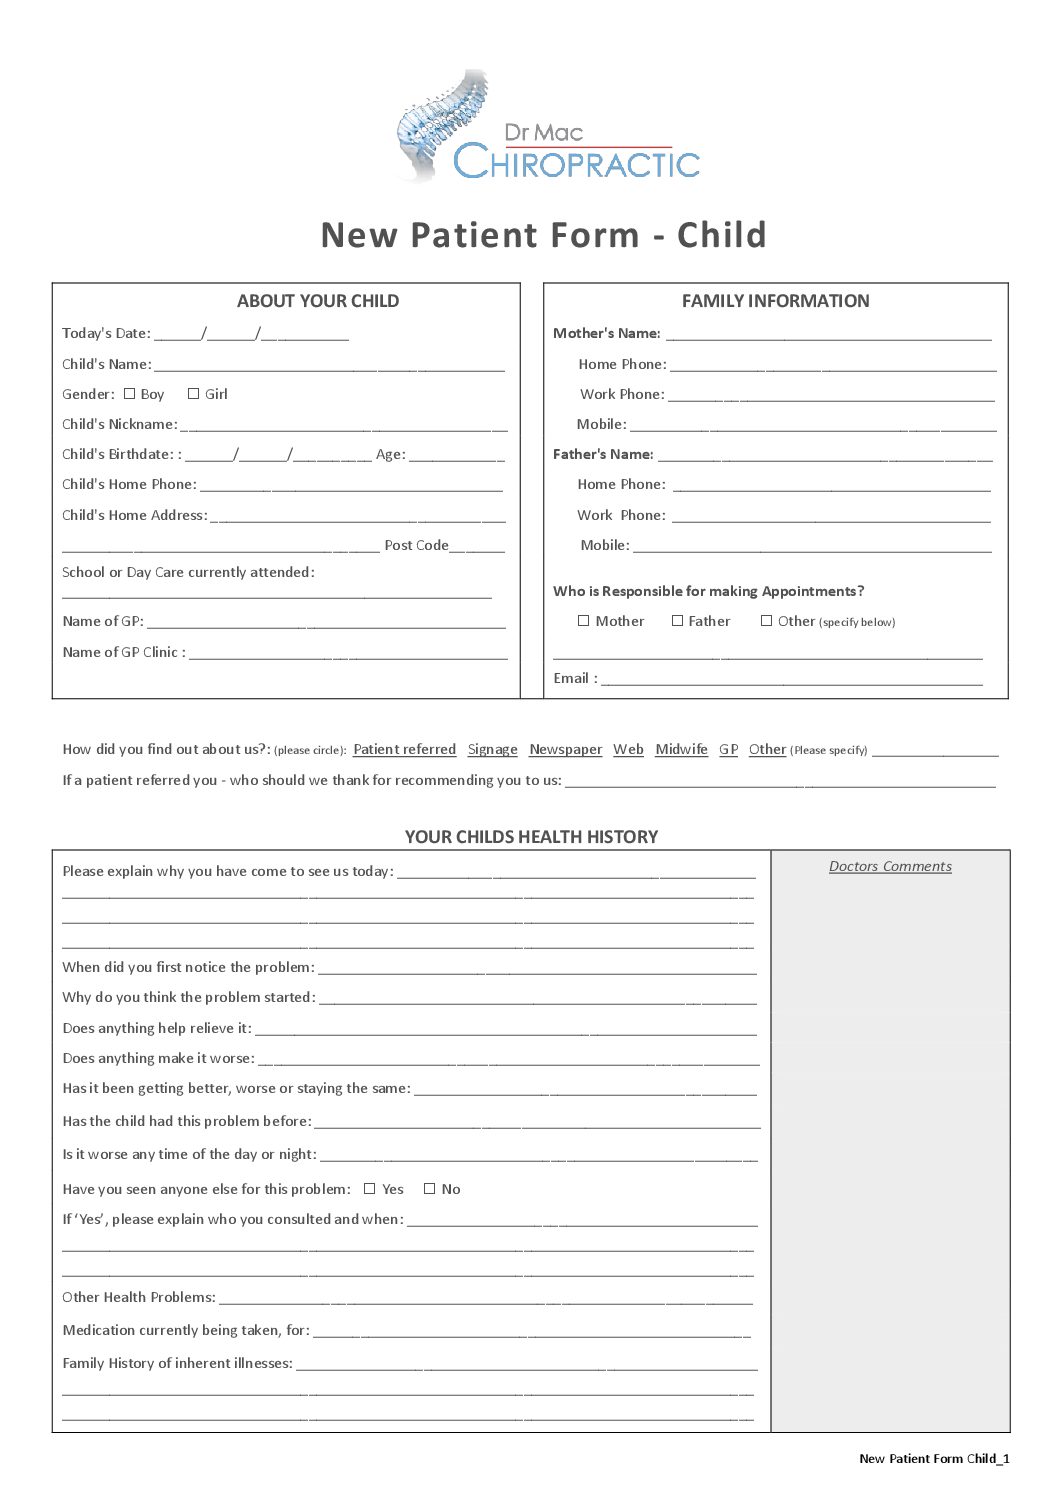 new-patient-form-child-dr-mac-chiropractic-albany-north-shore